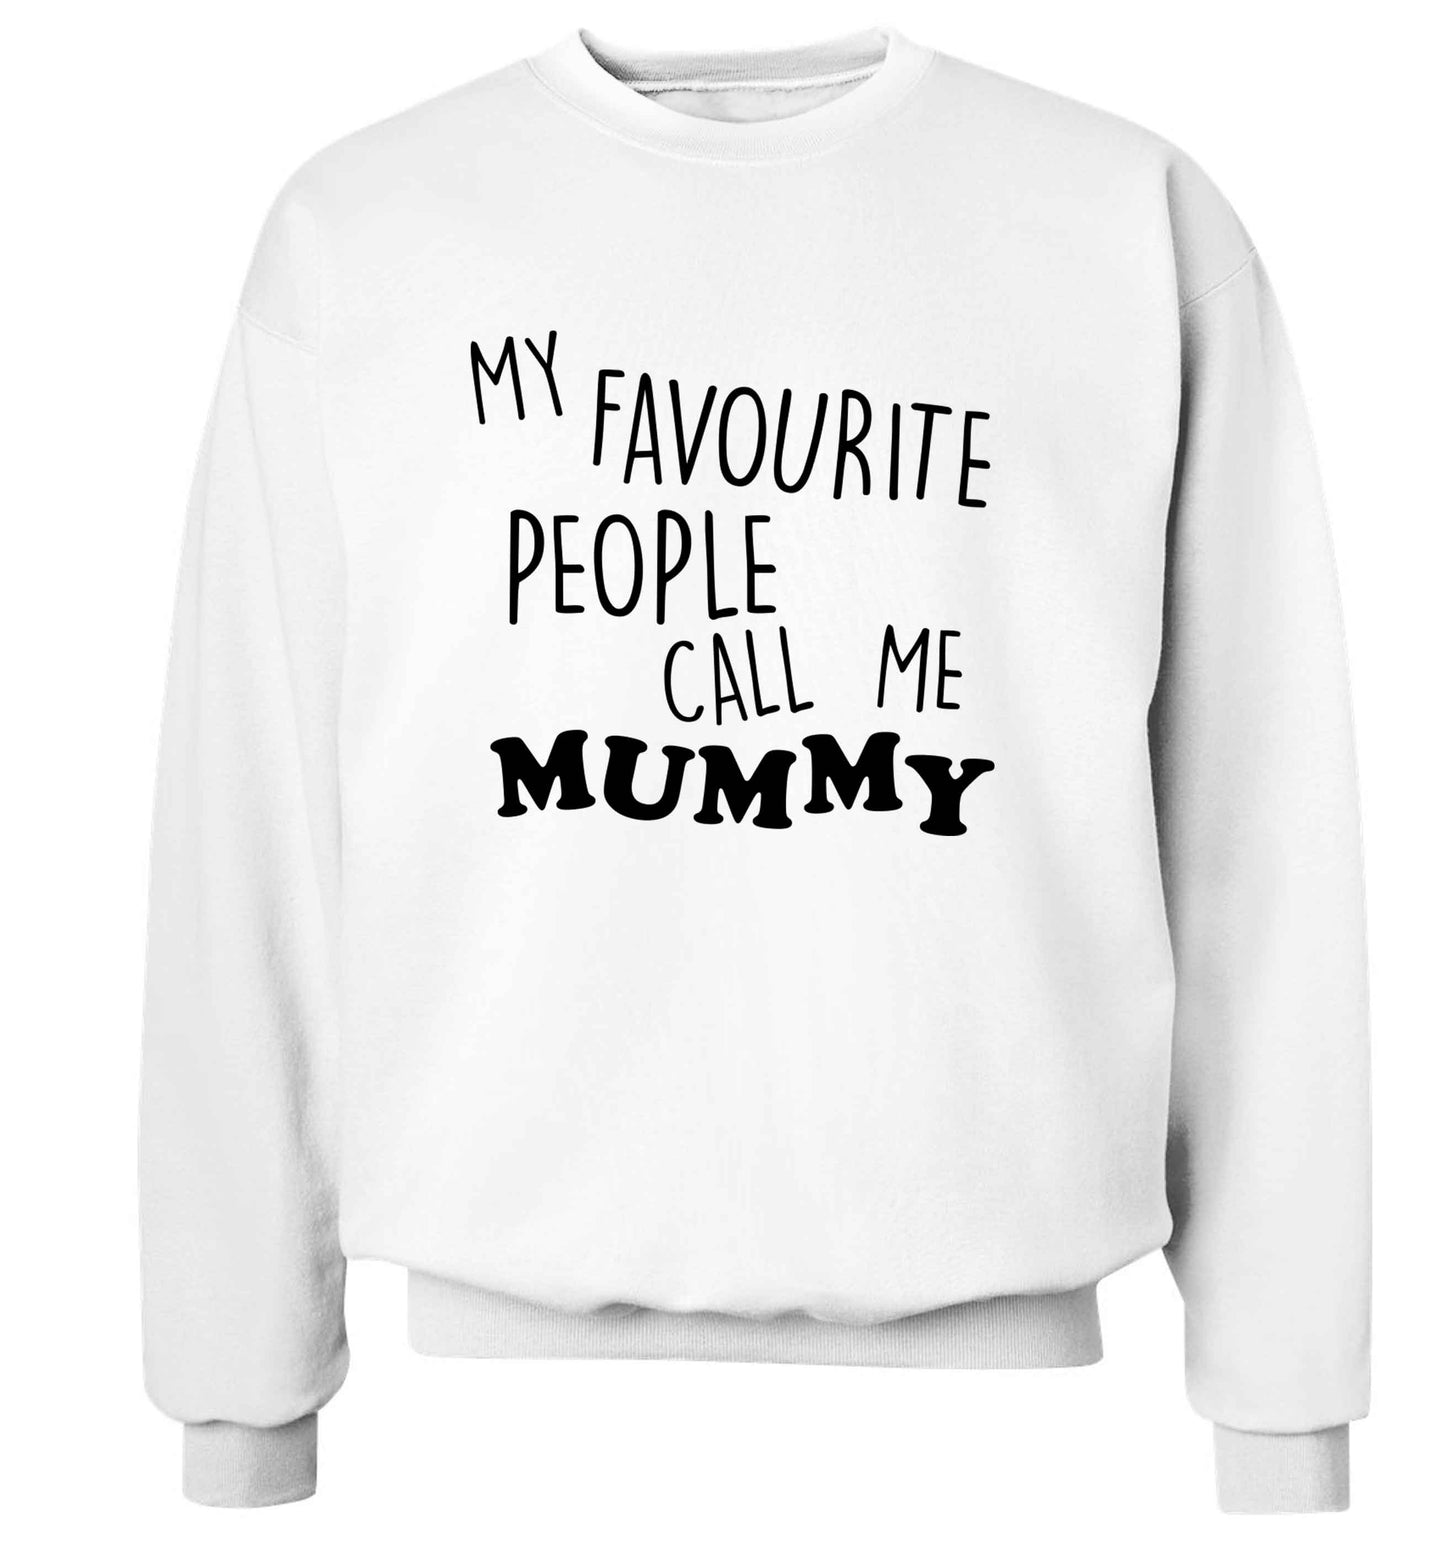 My favourite people call me mummy adult's unisex white sweater 2XL